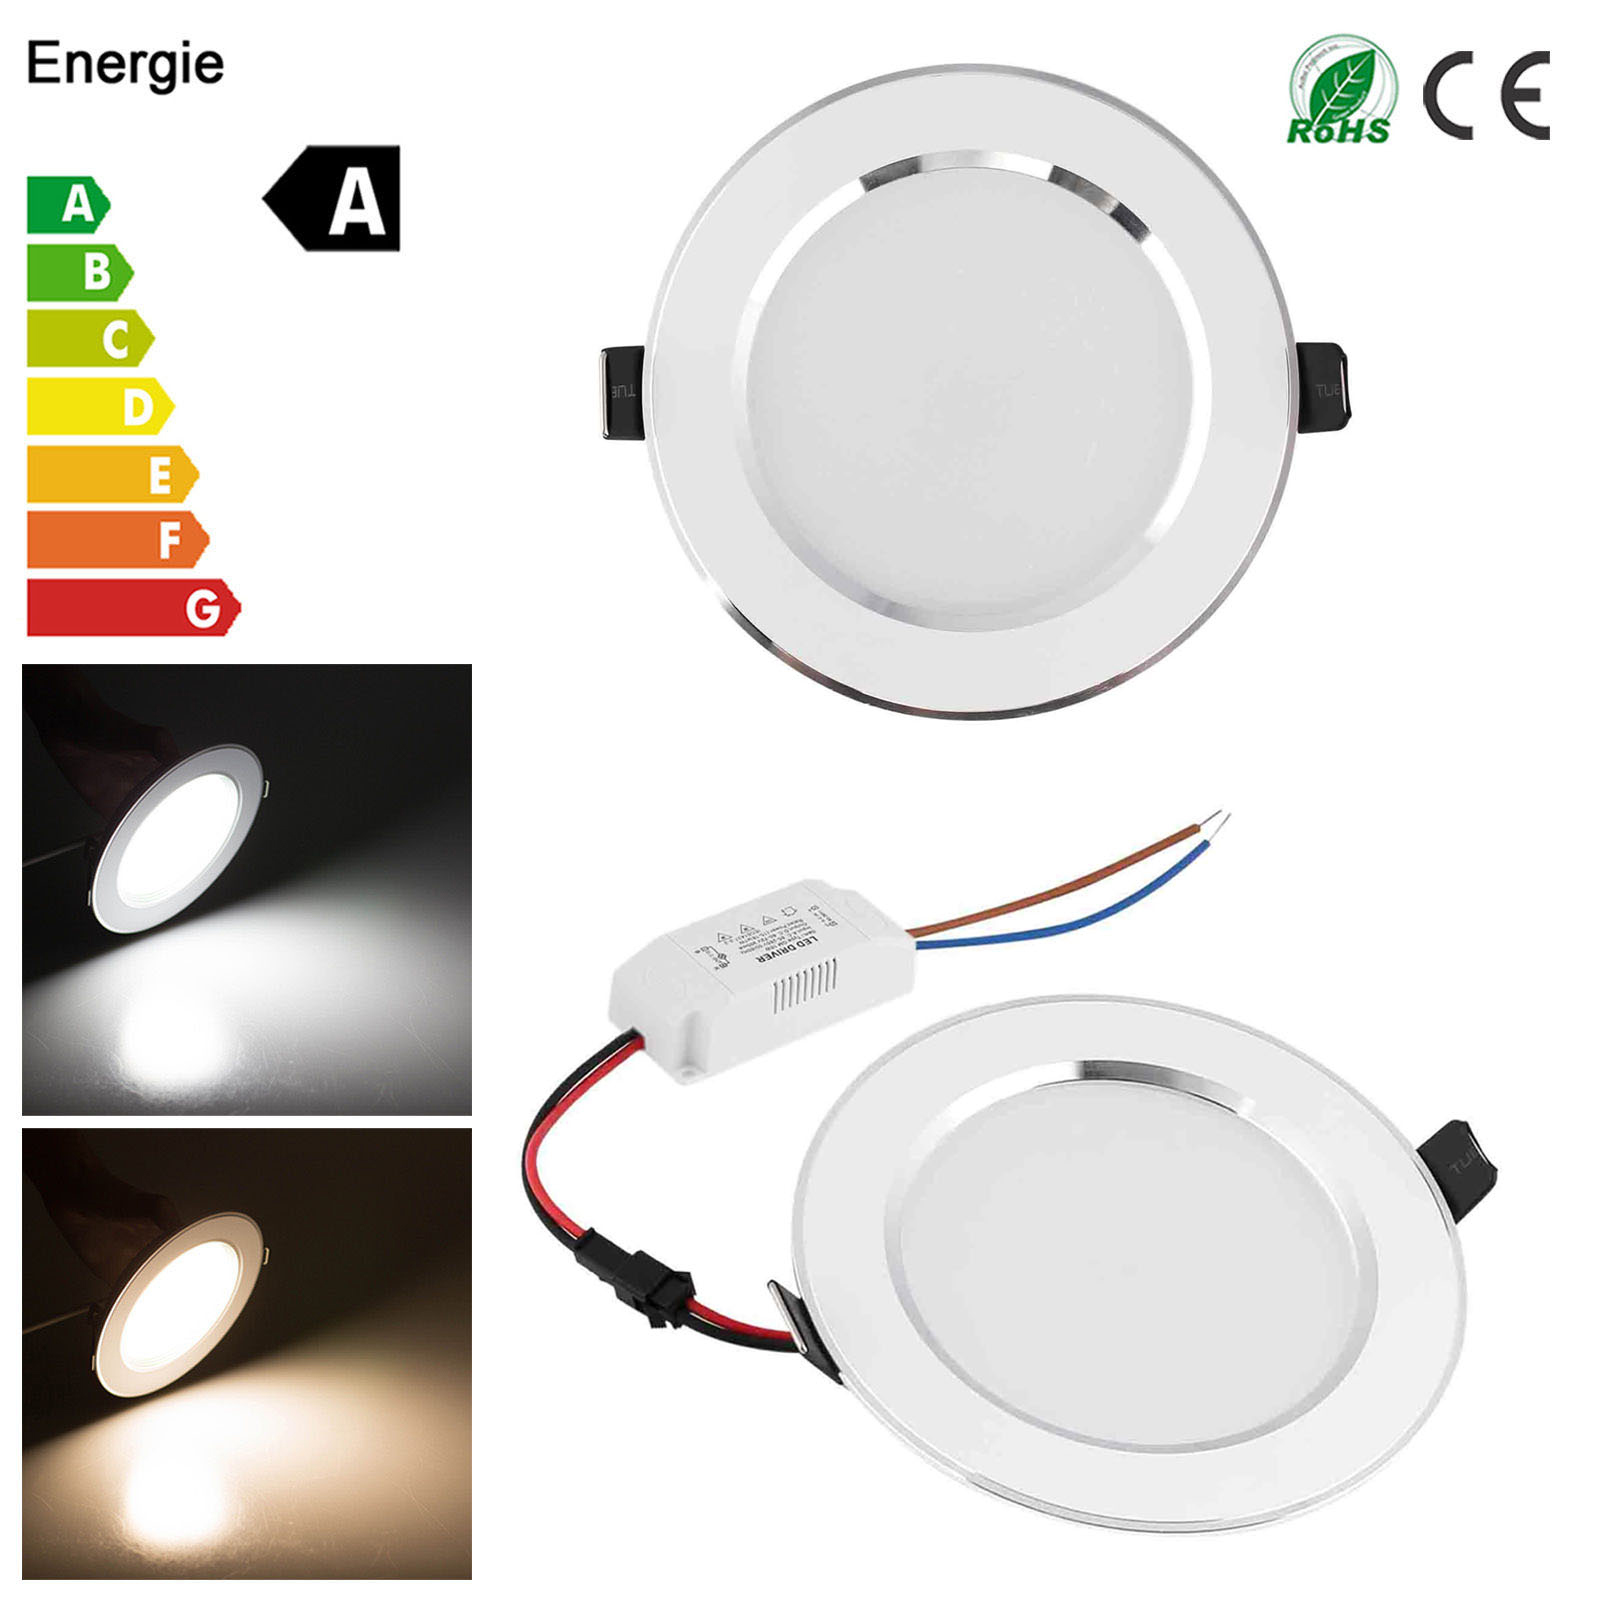 3W-18W Ultra-thin LED Recessed Ceiling Panel Down Light Bulb Office Lamp Fixture 